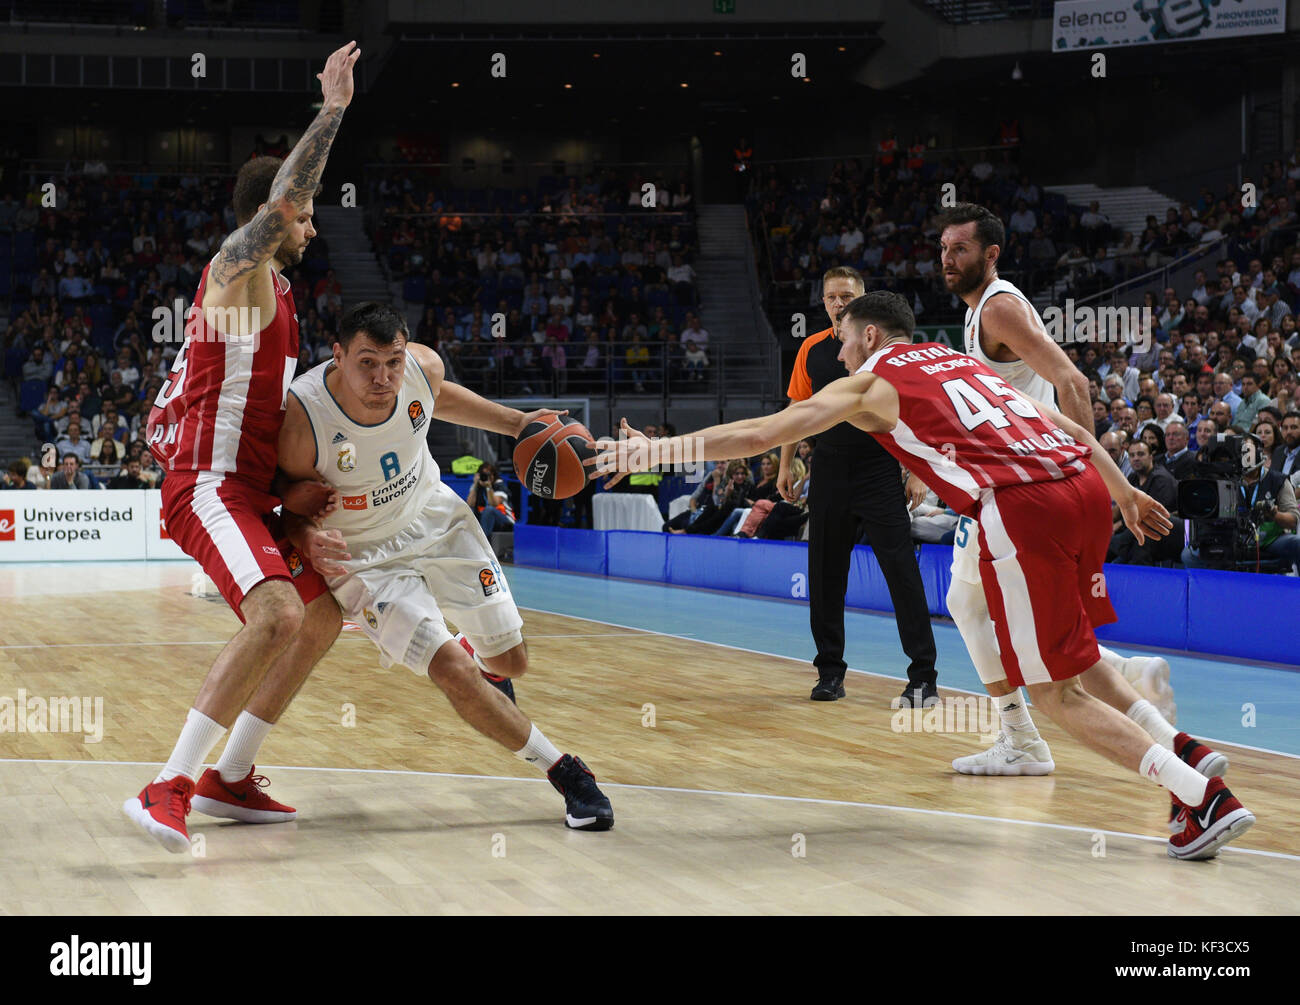 Madrid, Spain. 24th Oct, 2017. Jonas Maciulis (C) #8 of Real Madrid in action during the Euroleague basketball match between Real Madrid and AX Armani Exchange Olimpia Milan at WiZink center in Madrid. Credit: Jorge Sanz/Pacific Press/Alamy Live News Stock Photo